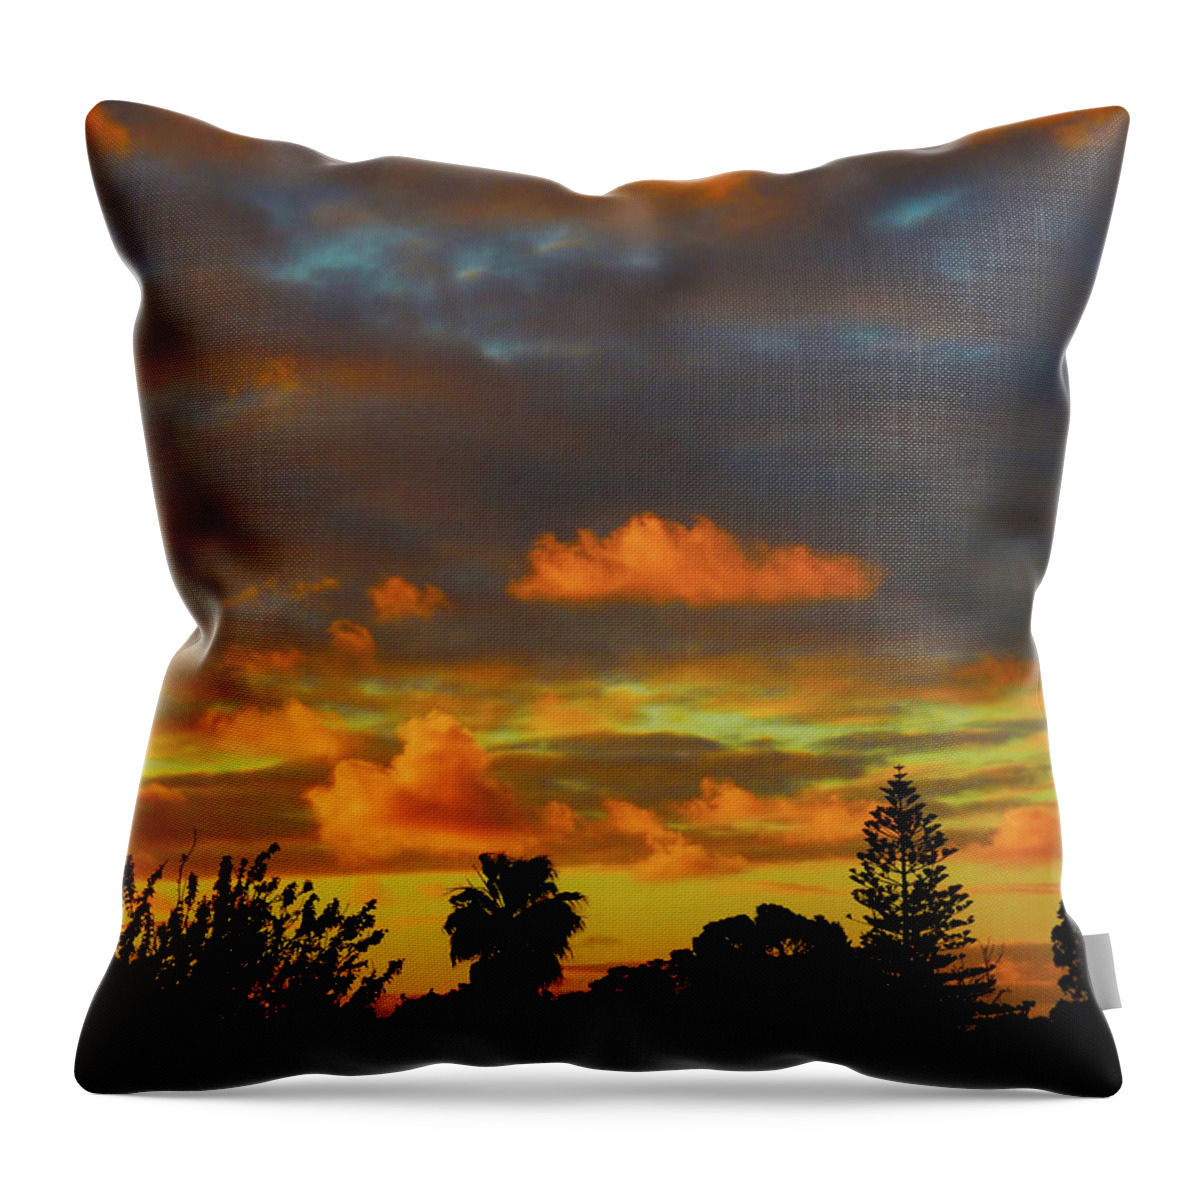 Sunset Throw Pillow featuring the photograph Jupiter Sunset by Mark Blauhoefer